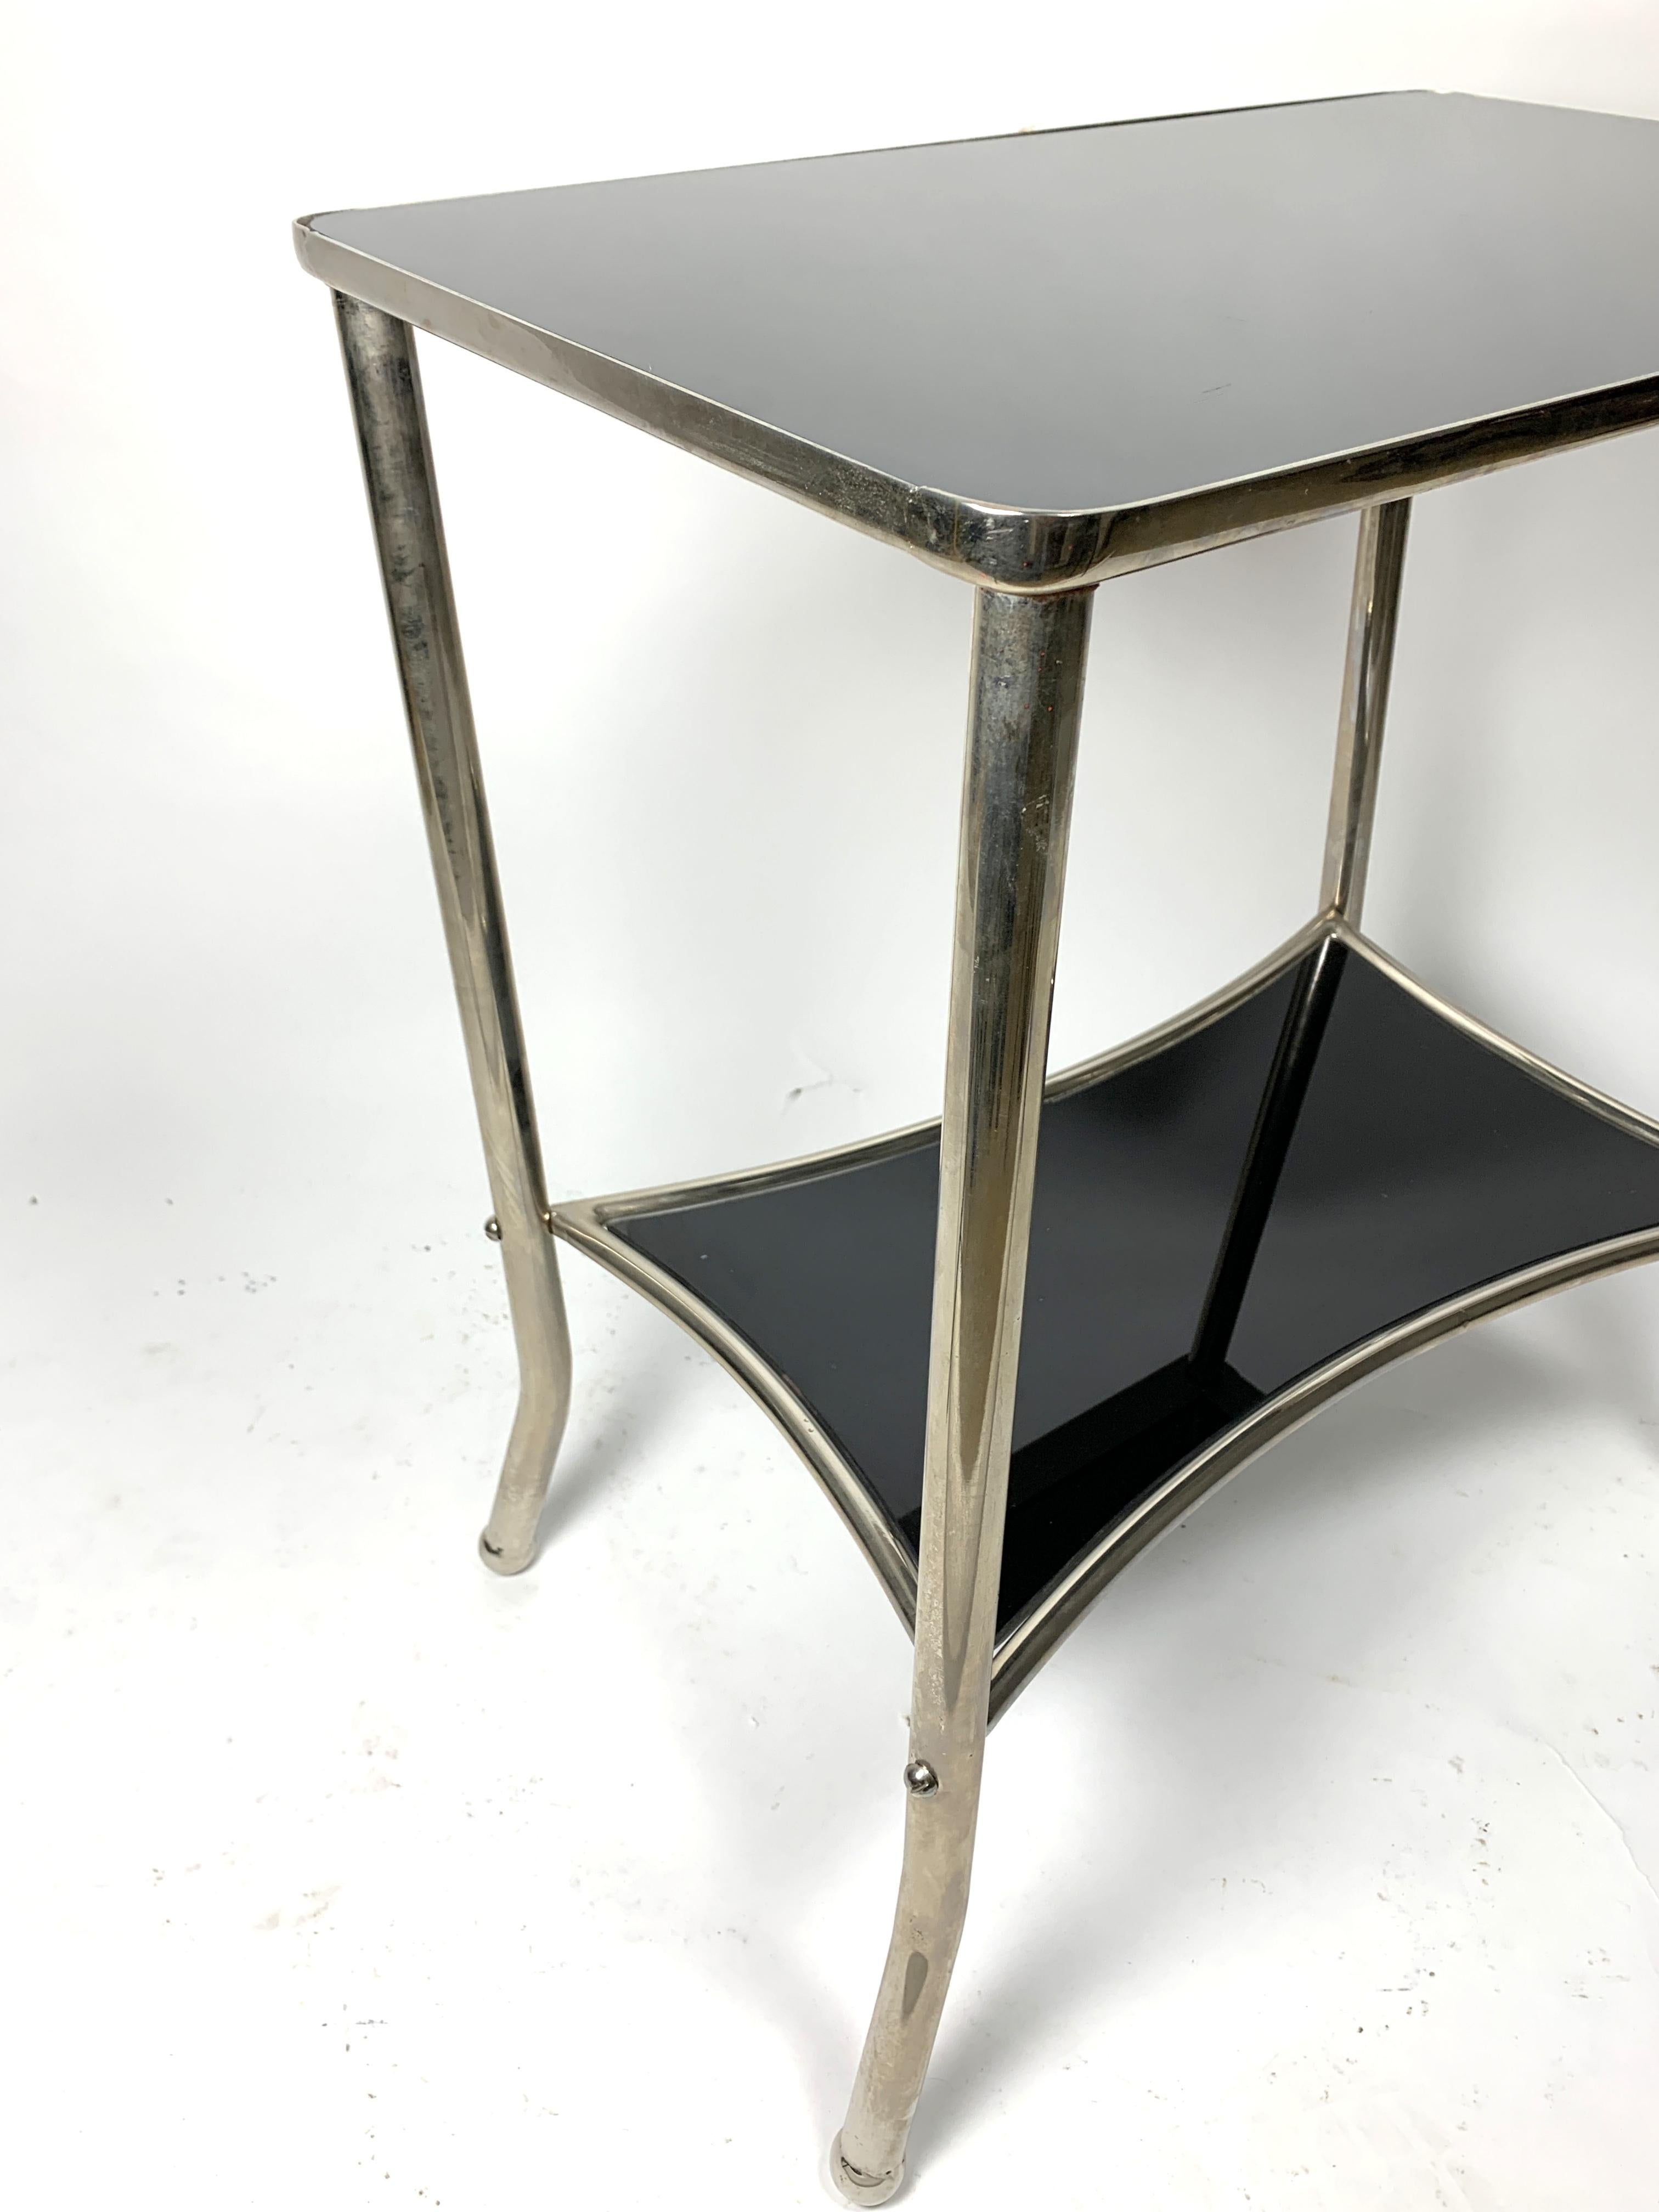 Mid-20th Century Nickel-Plated Console Table with Black Glass, 1930s